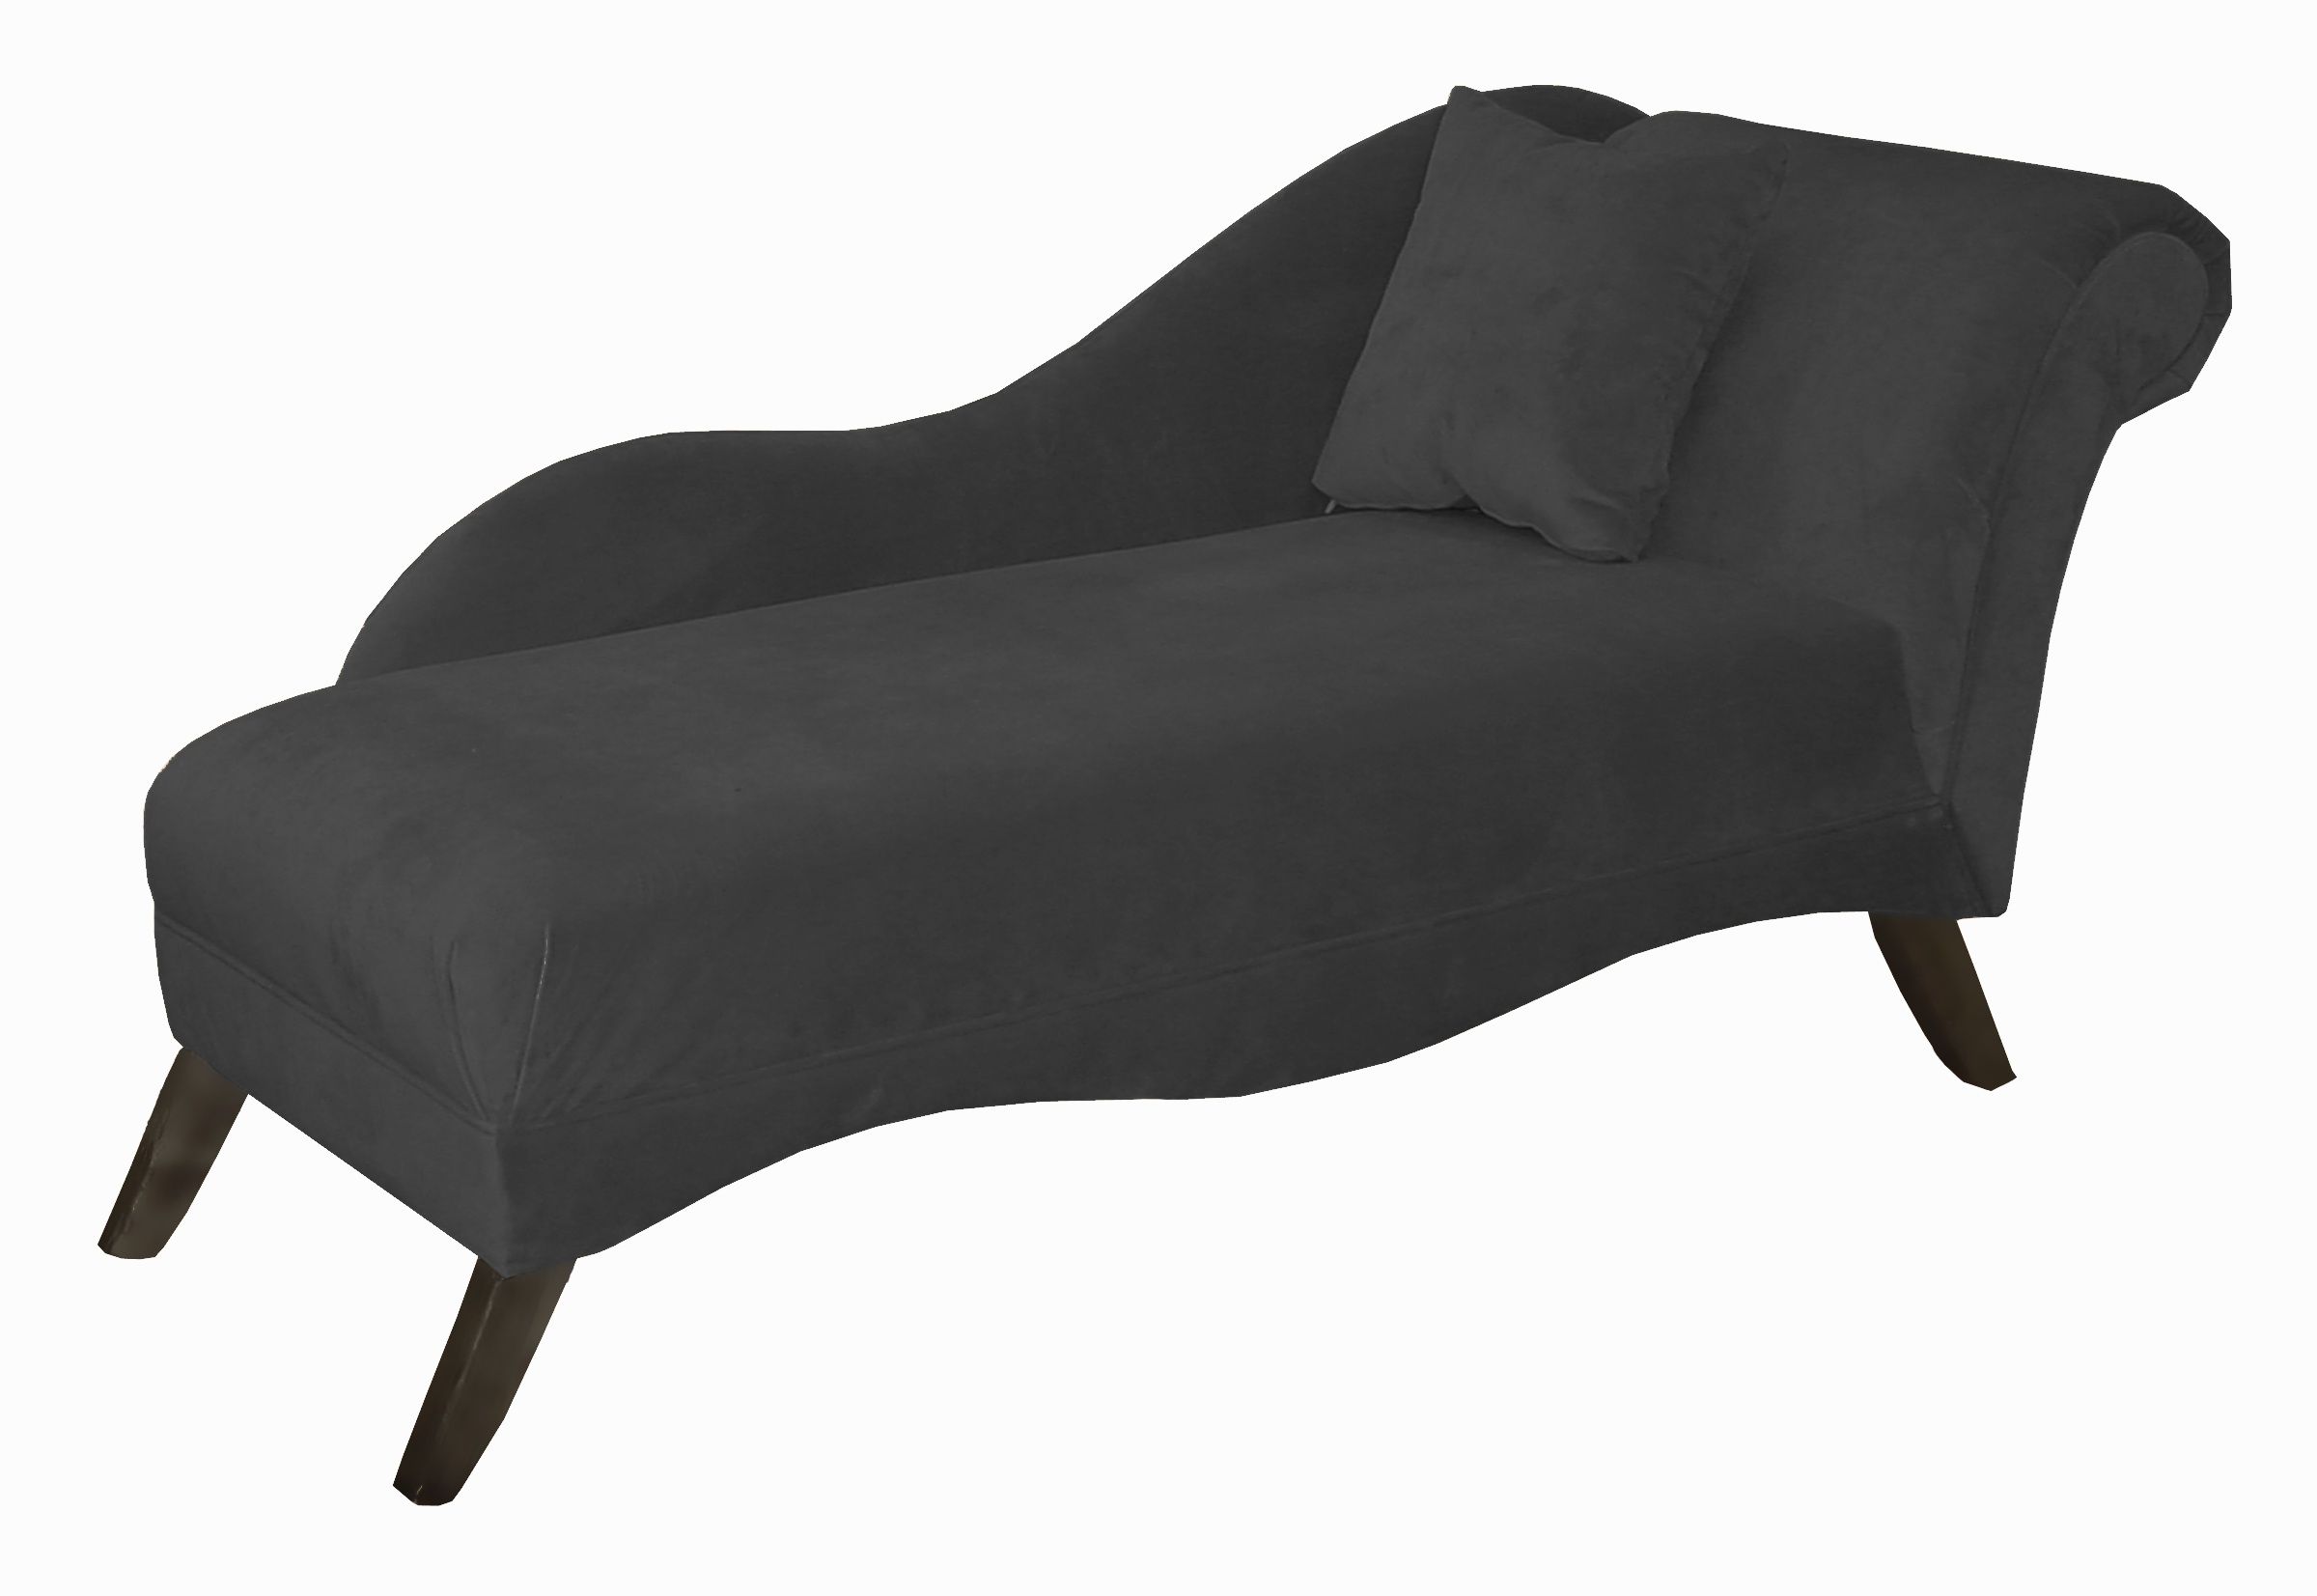 Chaise Lounge Covers Pertaining To Popular Brilliant Chaise Lounge Covers With Chaise Lounge Cover Lazulo (View 4 of 15)